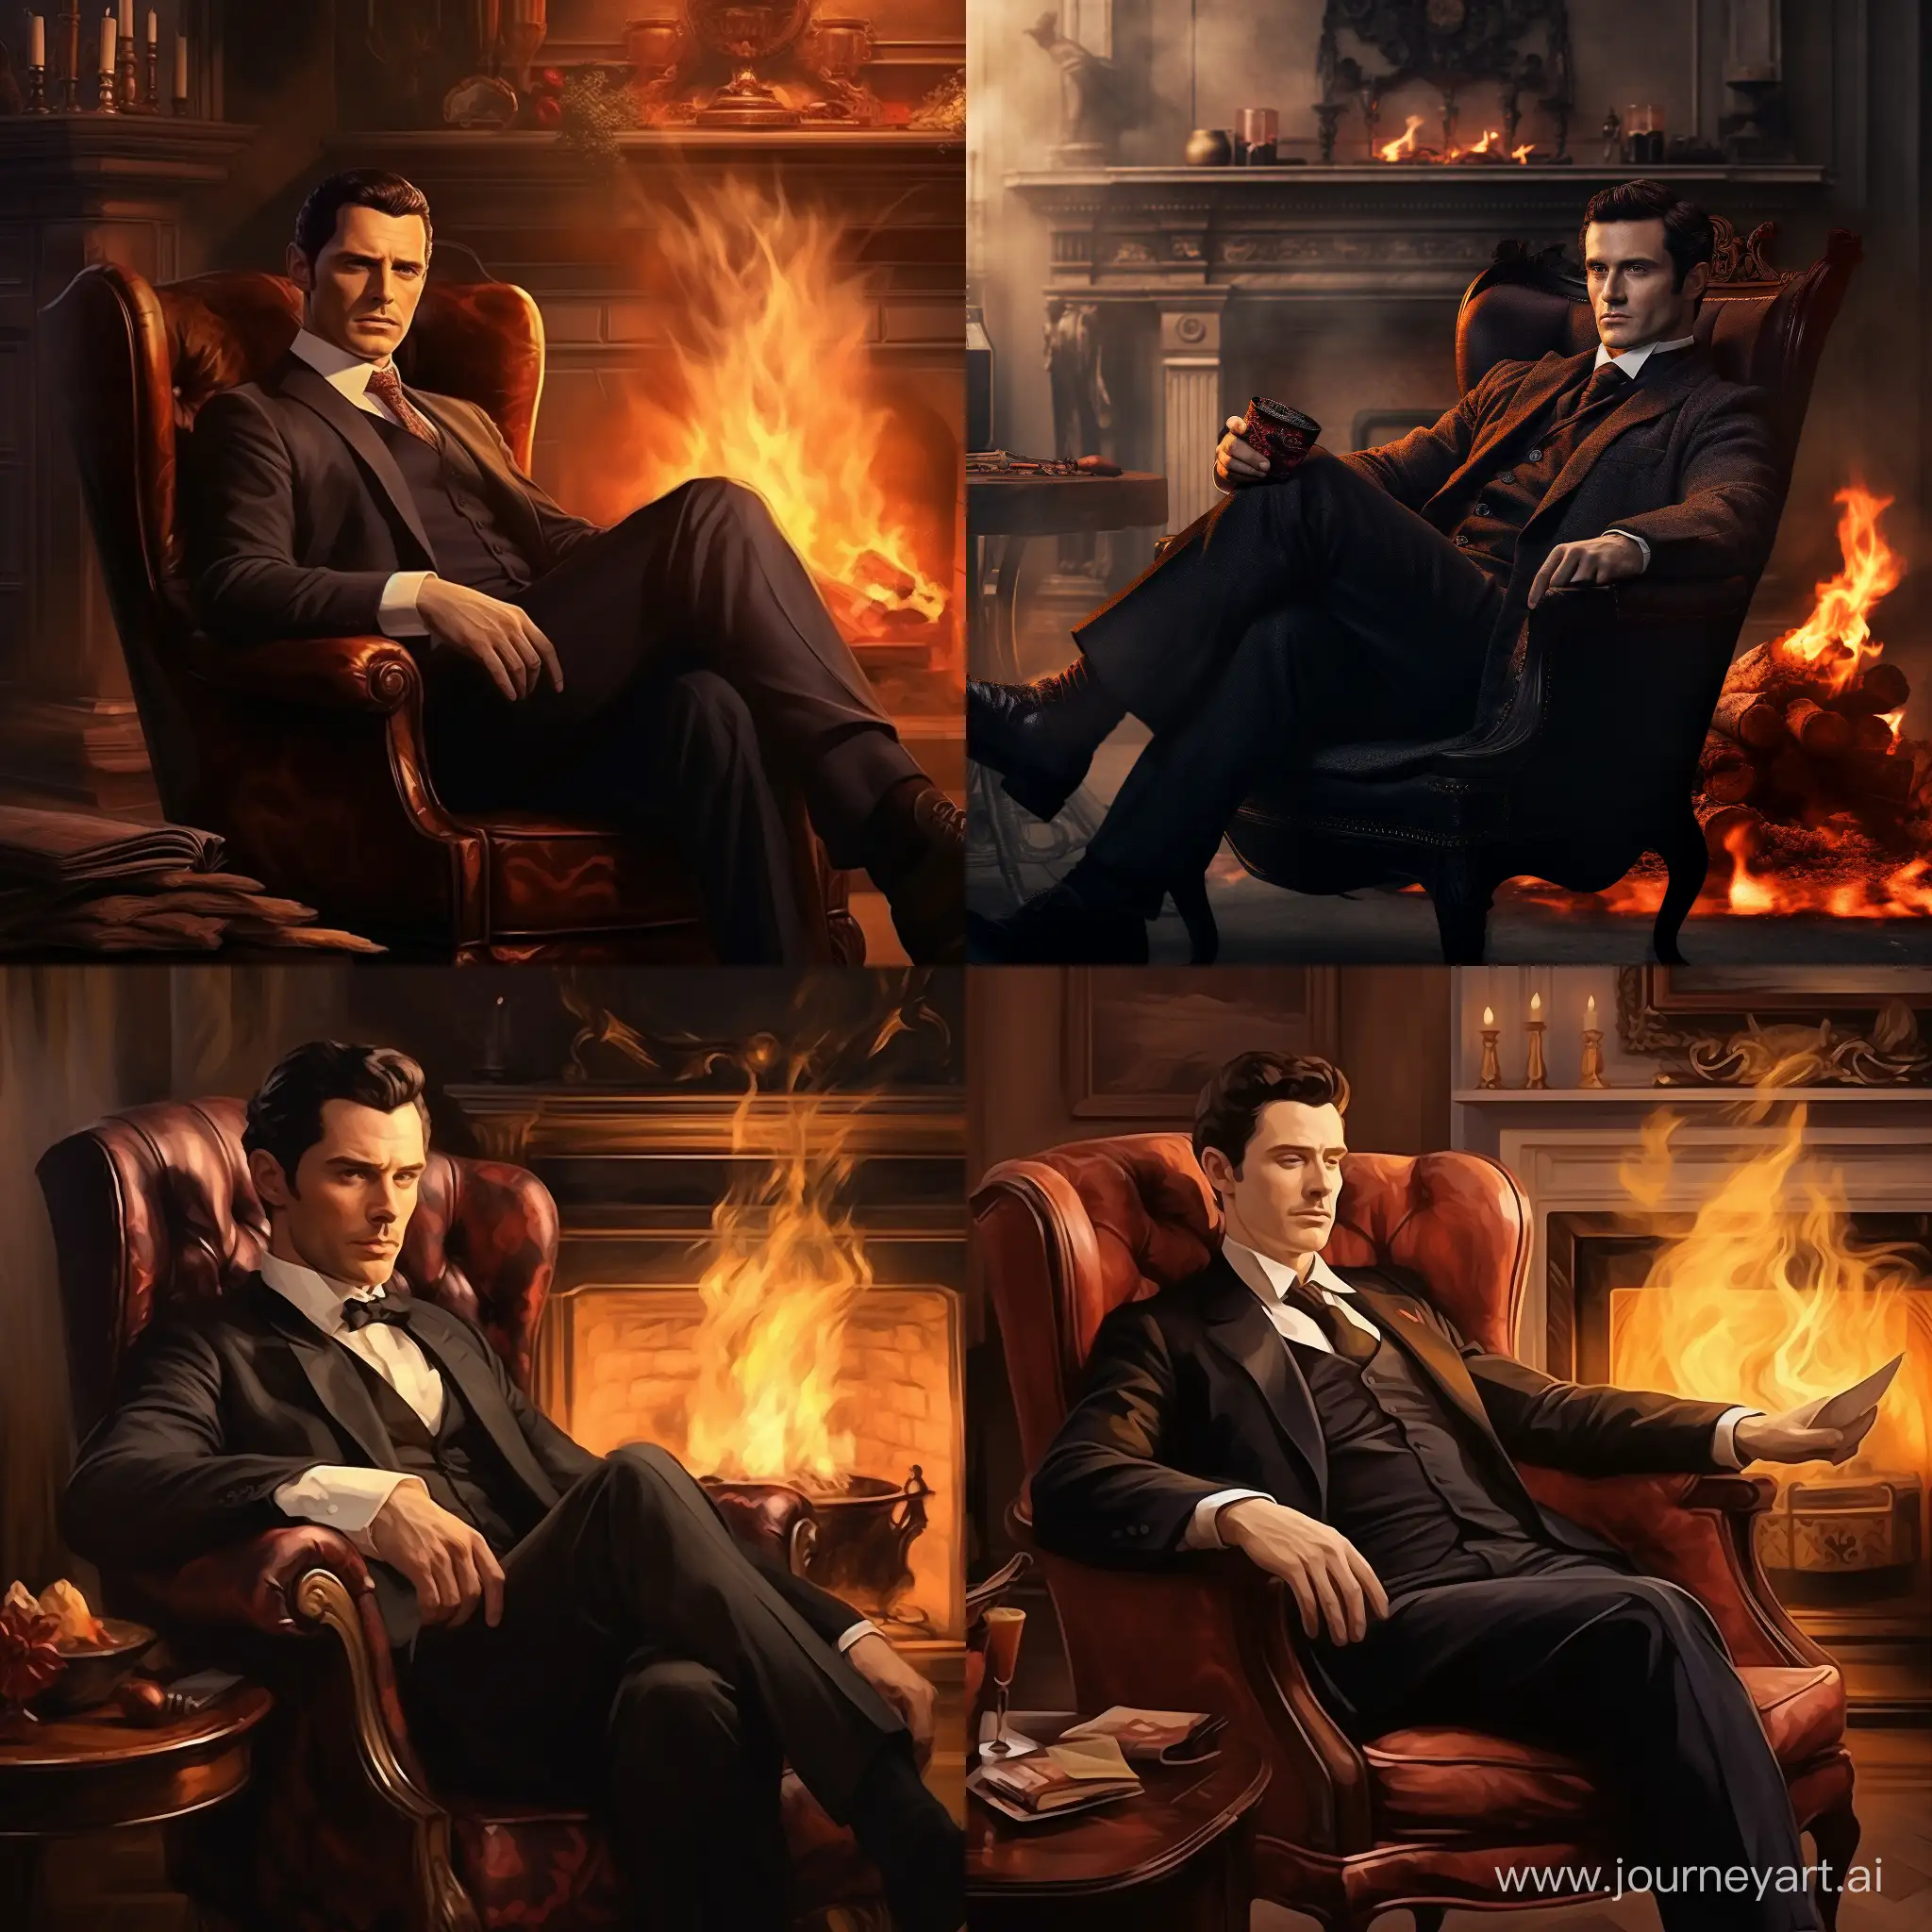 Sherlock Holmes is sitting on an armchair and looking thoughtfully at the fireplace. In a mysterious style